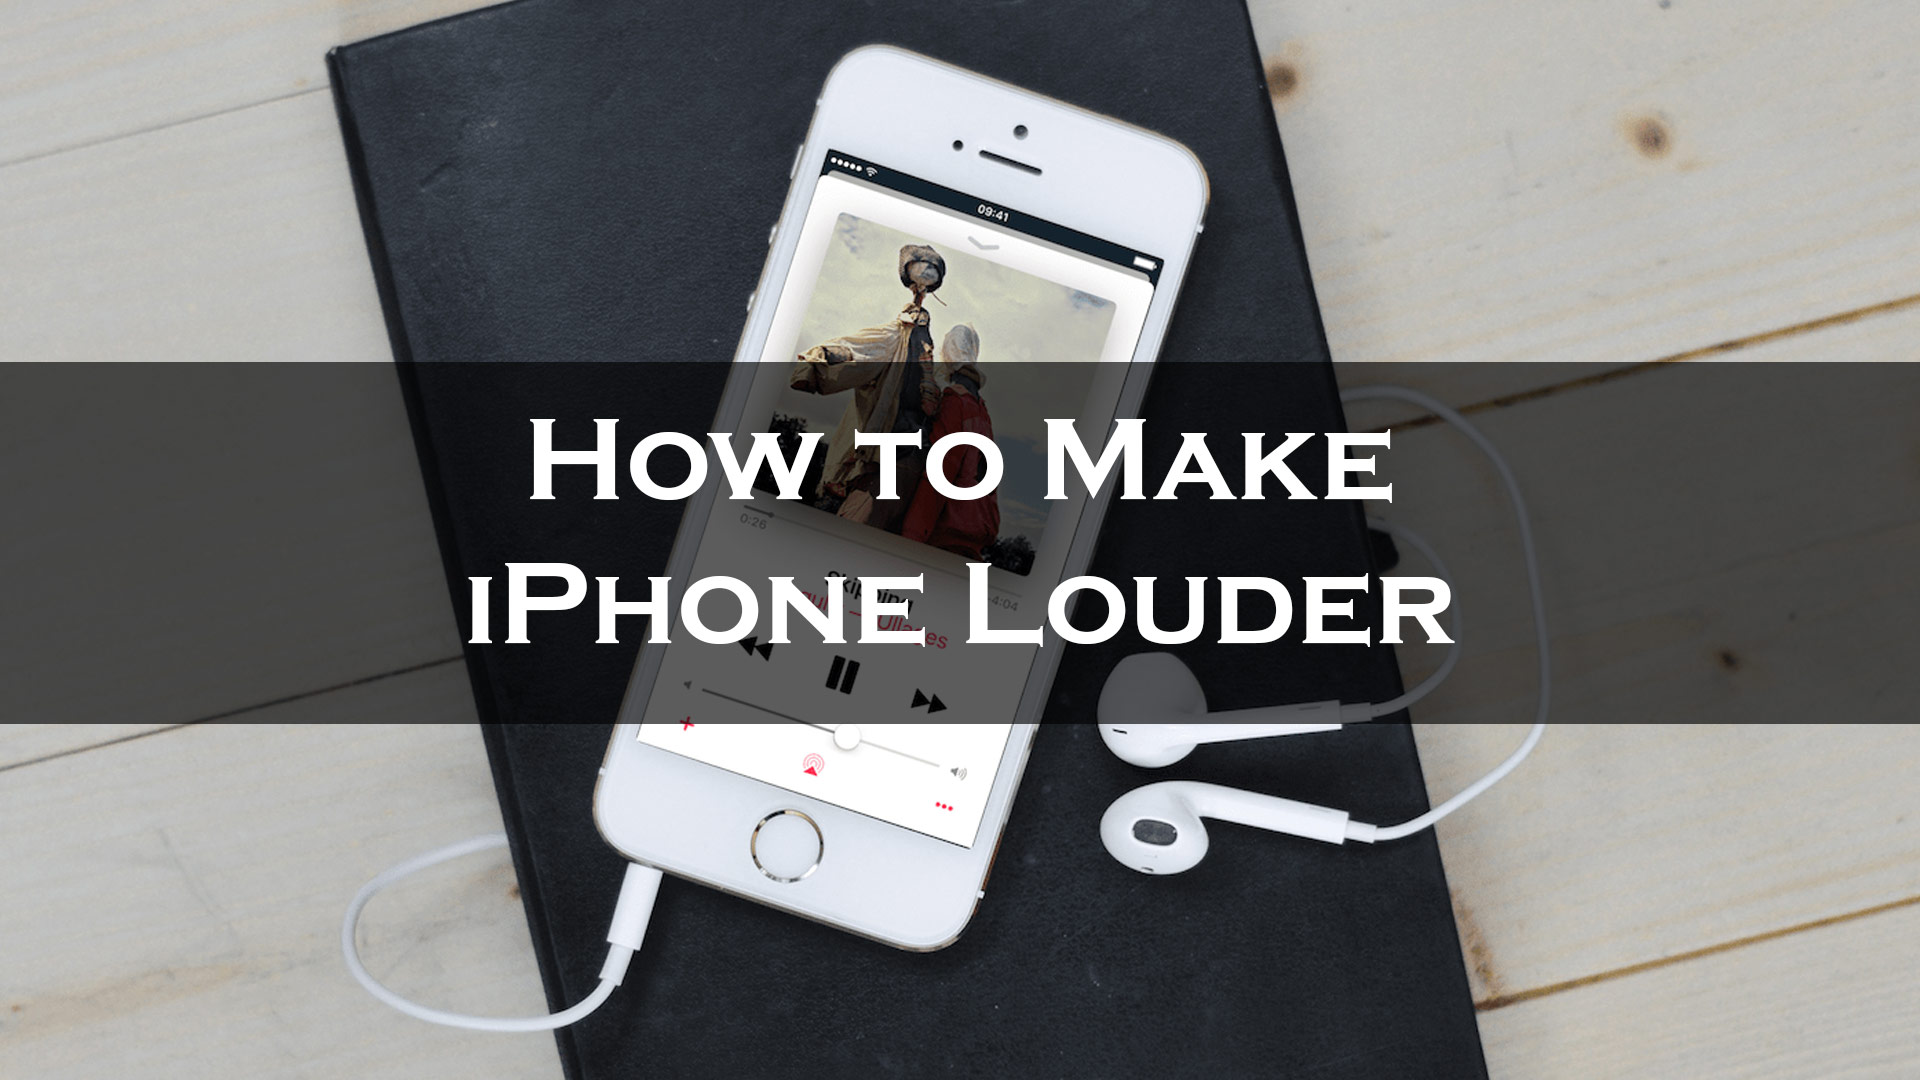 How to Make iPhone Louder